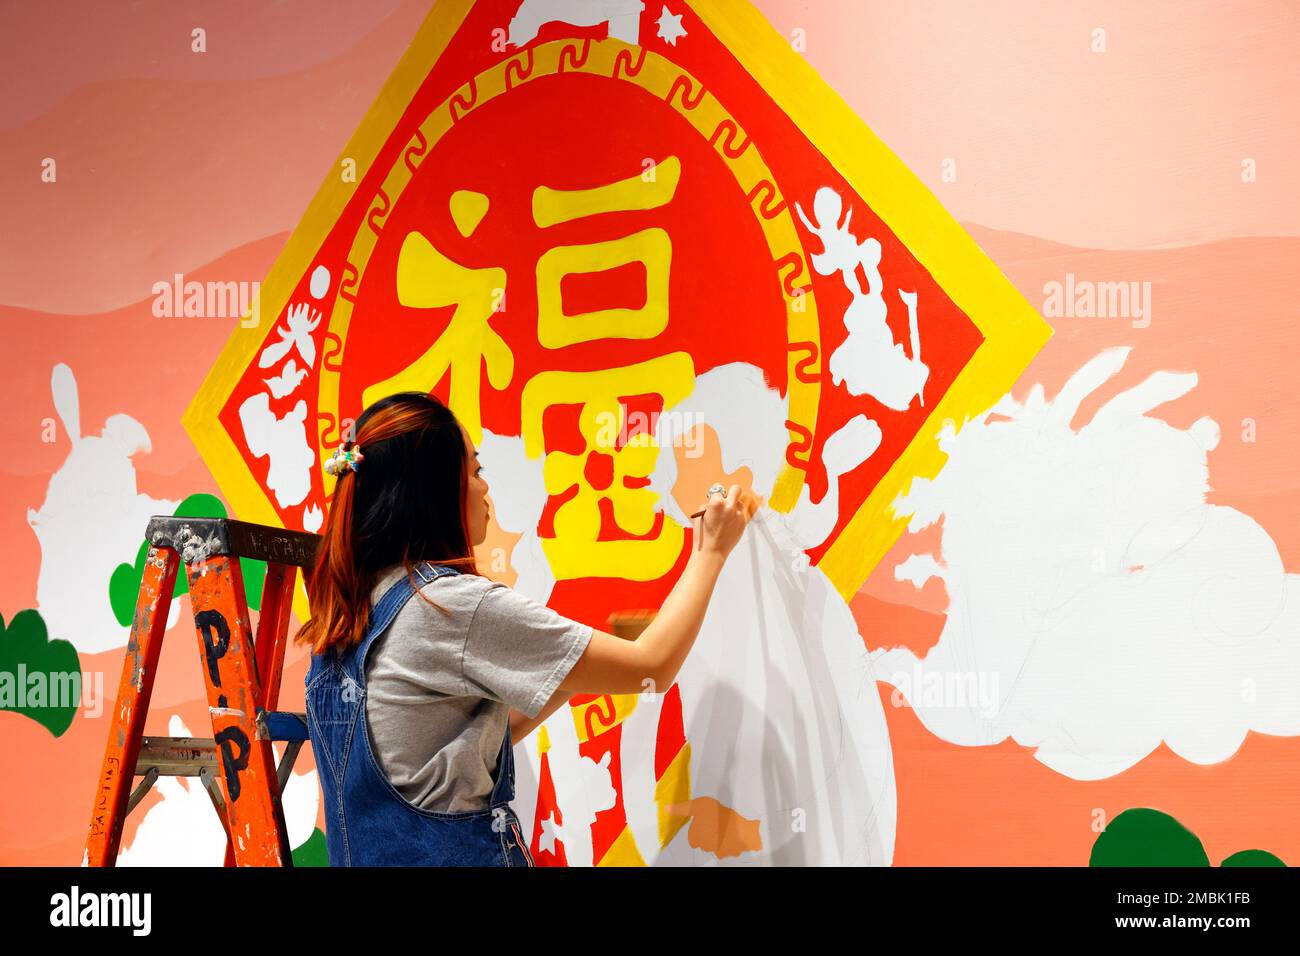 Artist Helen So works on a Lunar New Year painting at the Essex Market in New York City, January 17, 2023. The painting features ...(see more details) Stock Photo